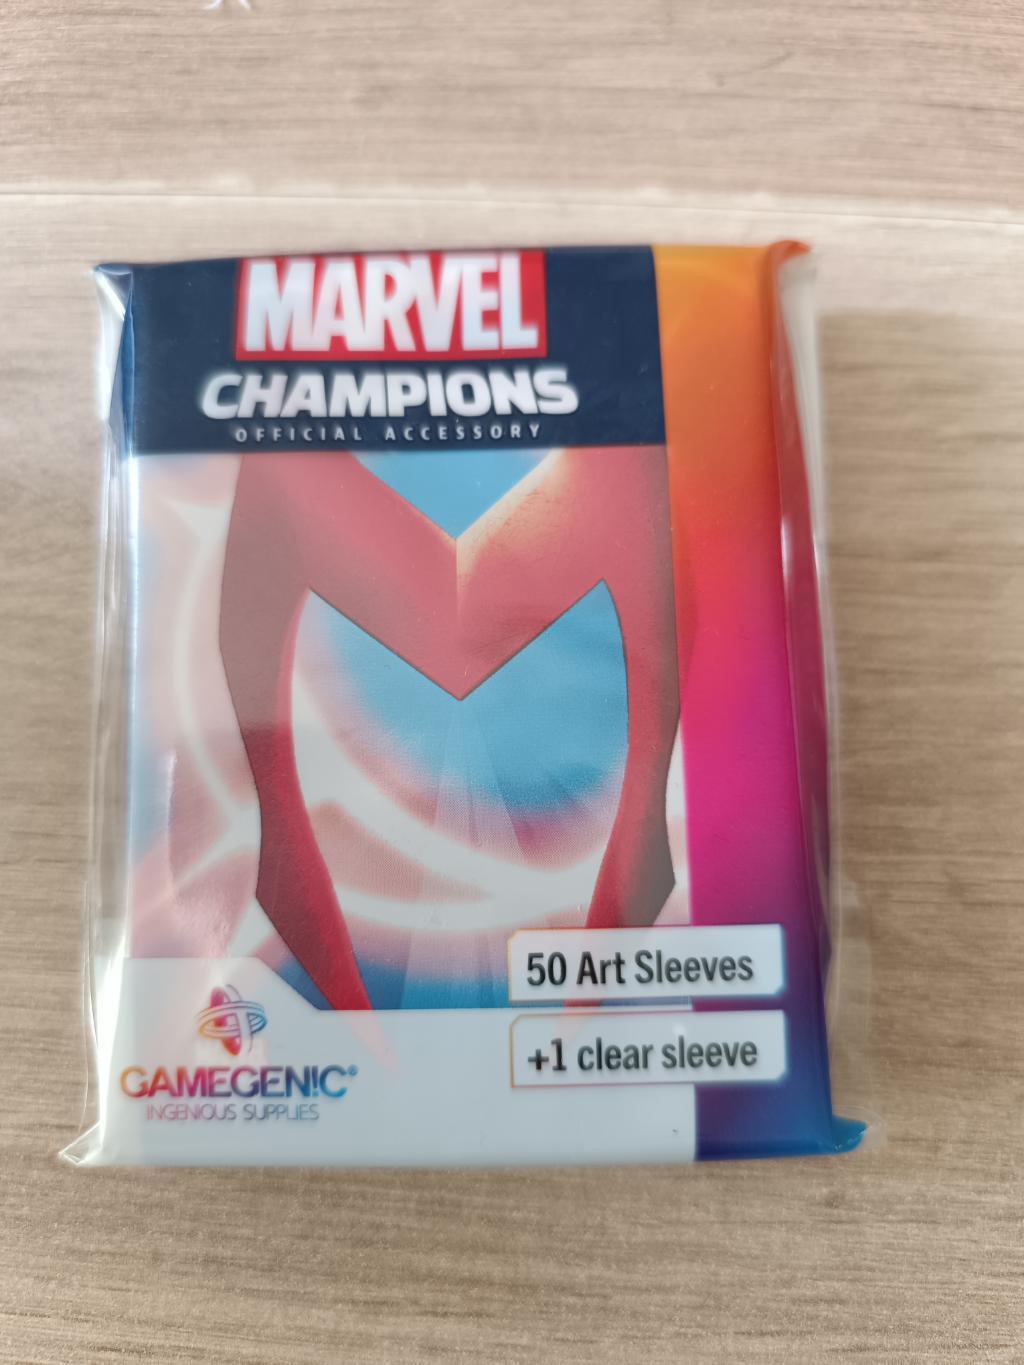 Marvel Champions Jce - Sleeves Marvel Champions Officielles Gamegenic Scarlet Witch